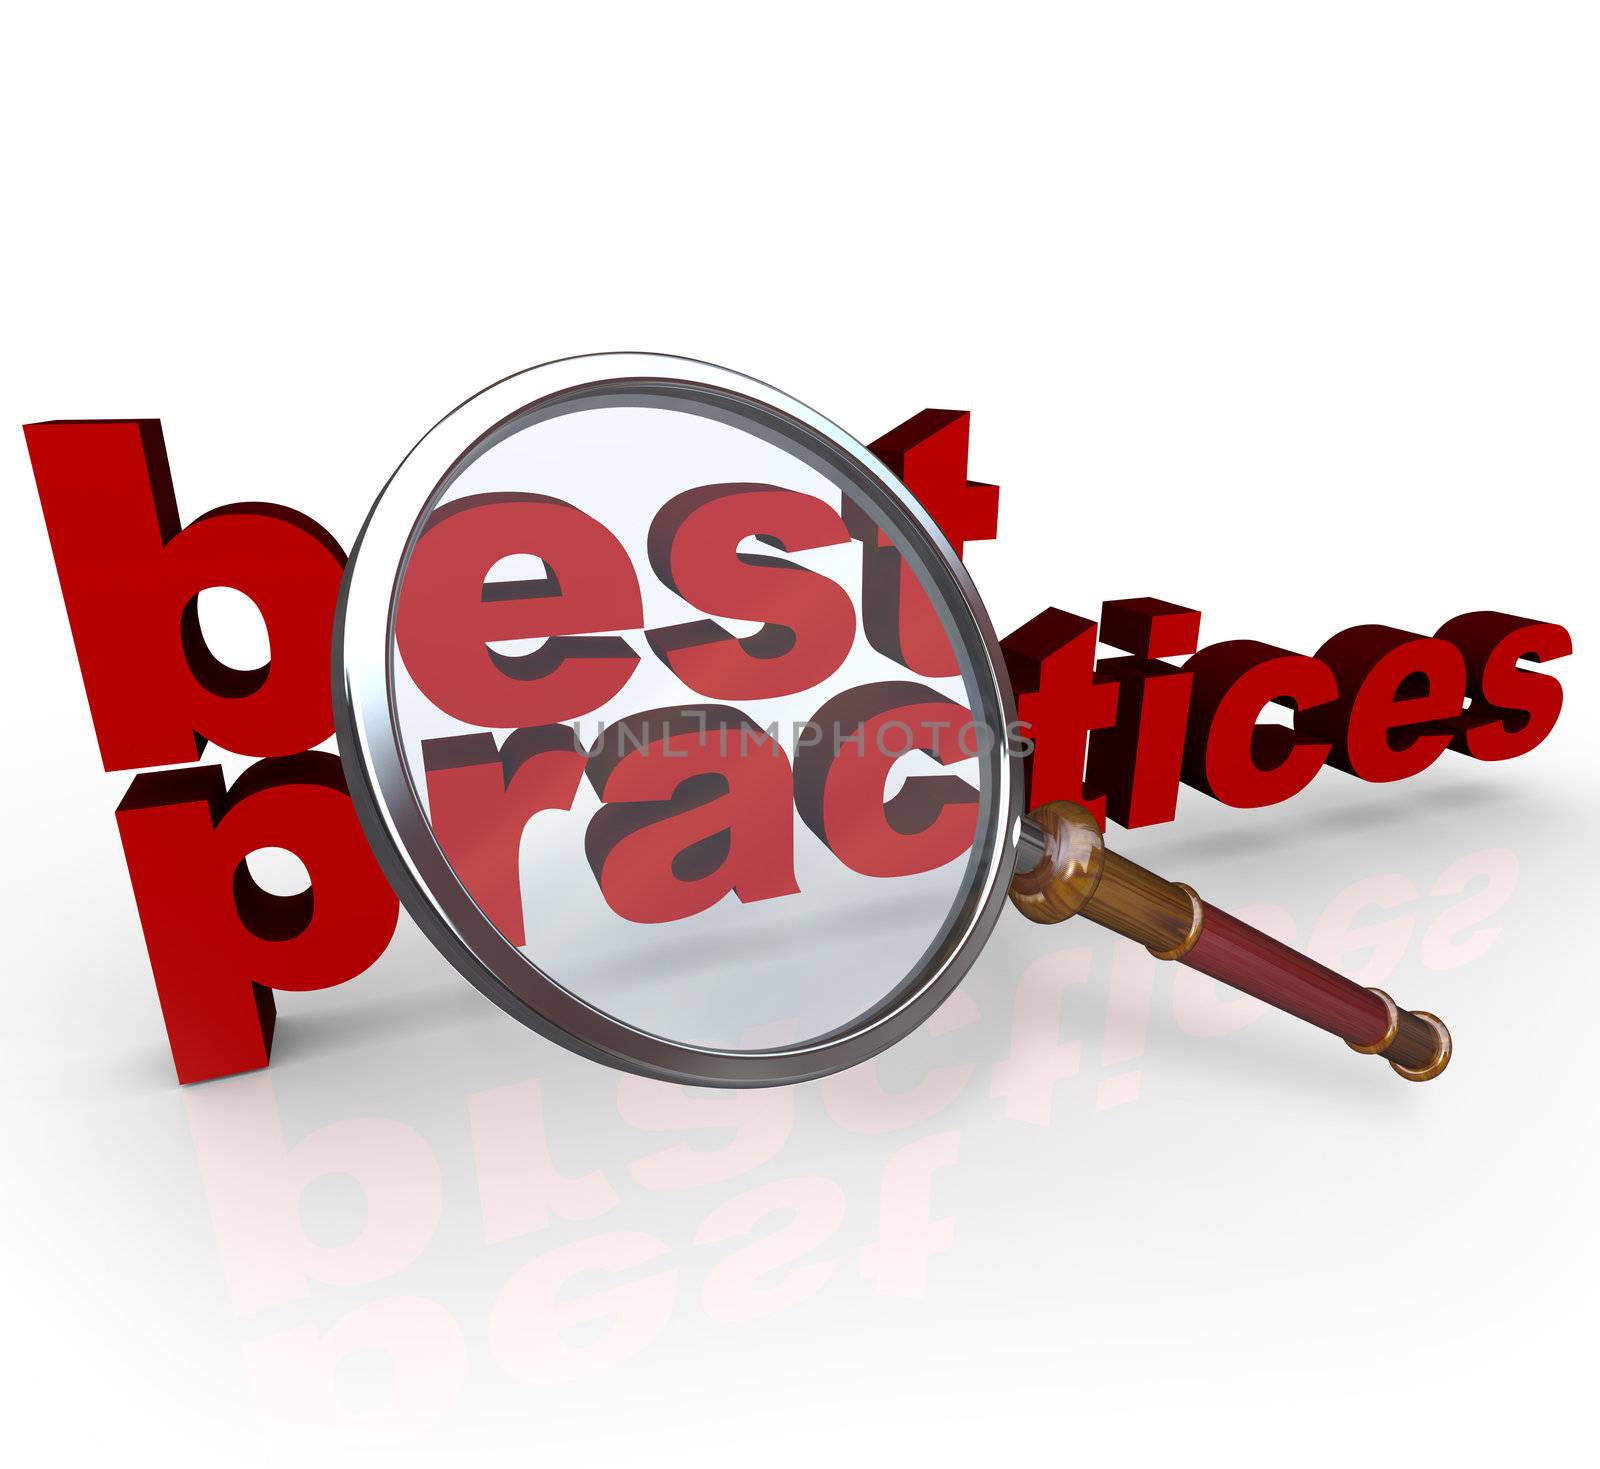 The words Best Practices in red letters under a magnifying glass to provide examples and lessons of good management ideas and advice